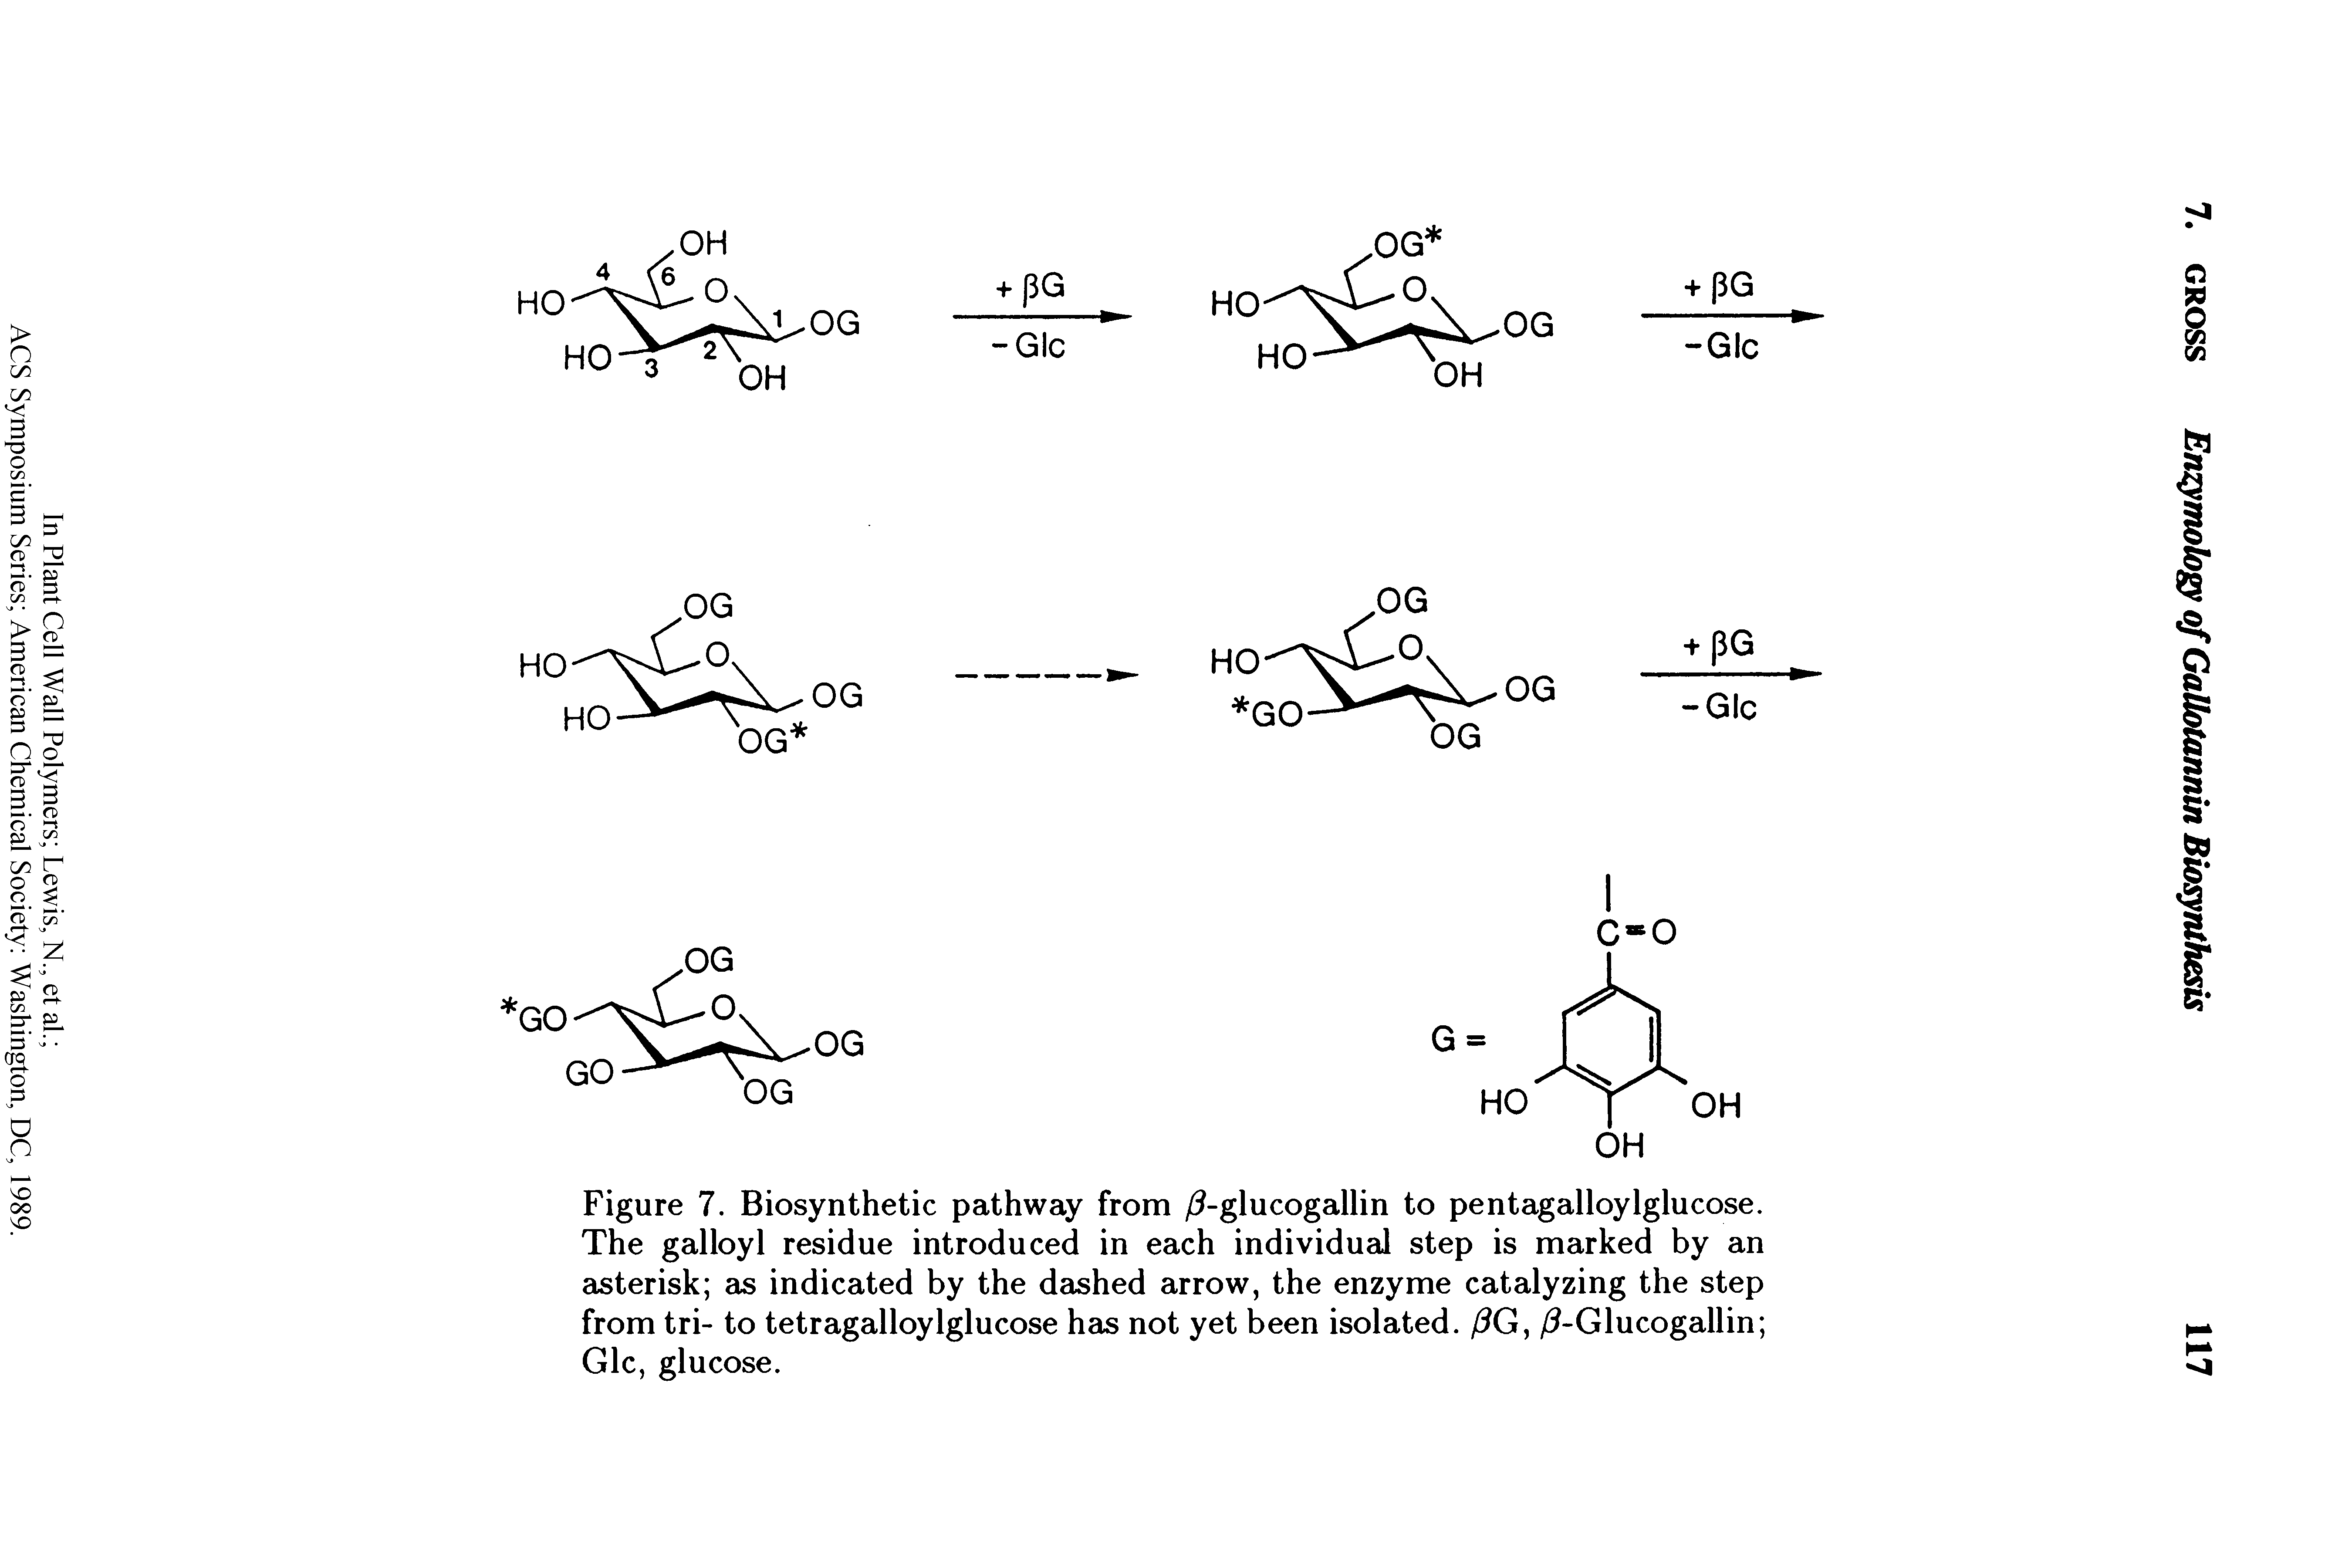 Figure 7. Biosynthetic pathway from / -glucogallin to pentagalloylglucose. The galloyl residue introduced in each individual step is marked by an asterisk as indicated by the dashed arrow, the enzyme catalyzing the step from tri- to tetragalloylglucose has not yet been isolated. /3G, / -Glucogallin Glc, glucose.